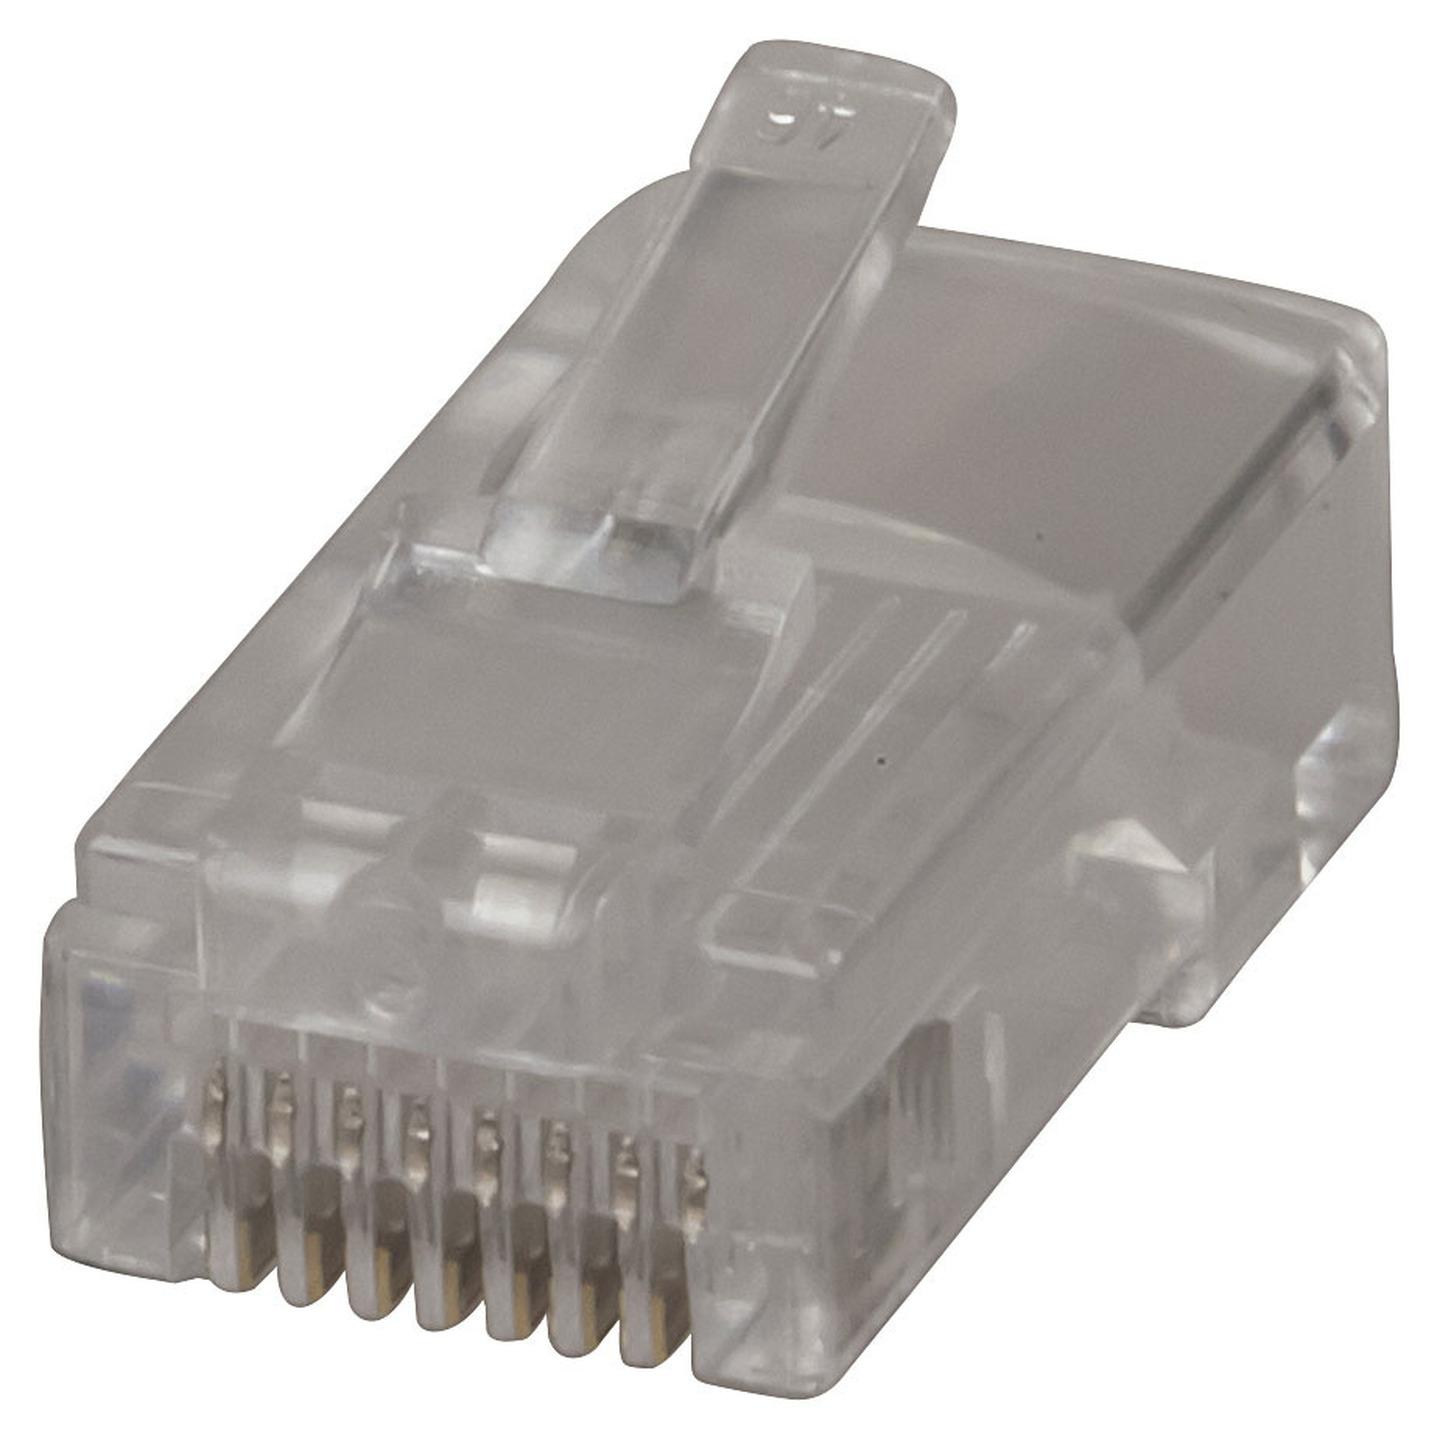 8 Pin US Type Telephone Plug For Solid Core Cable